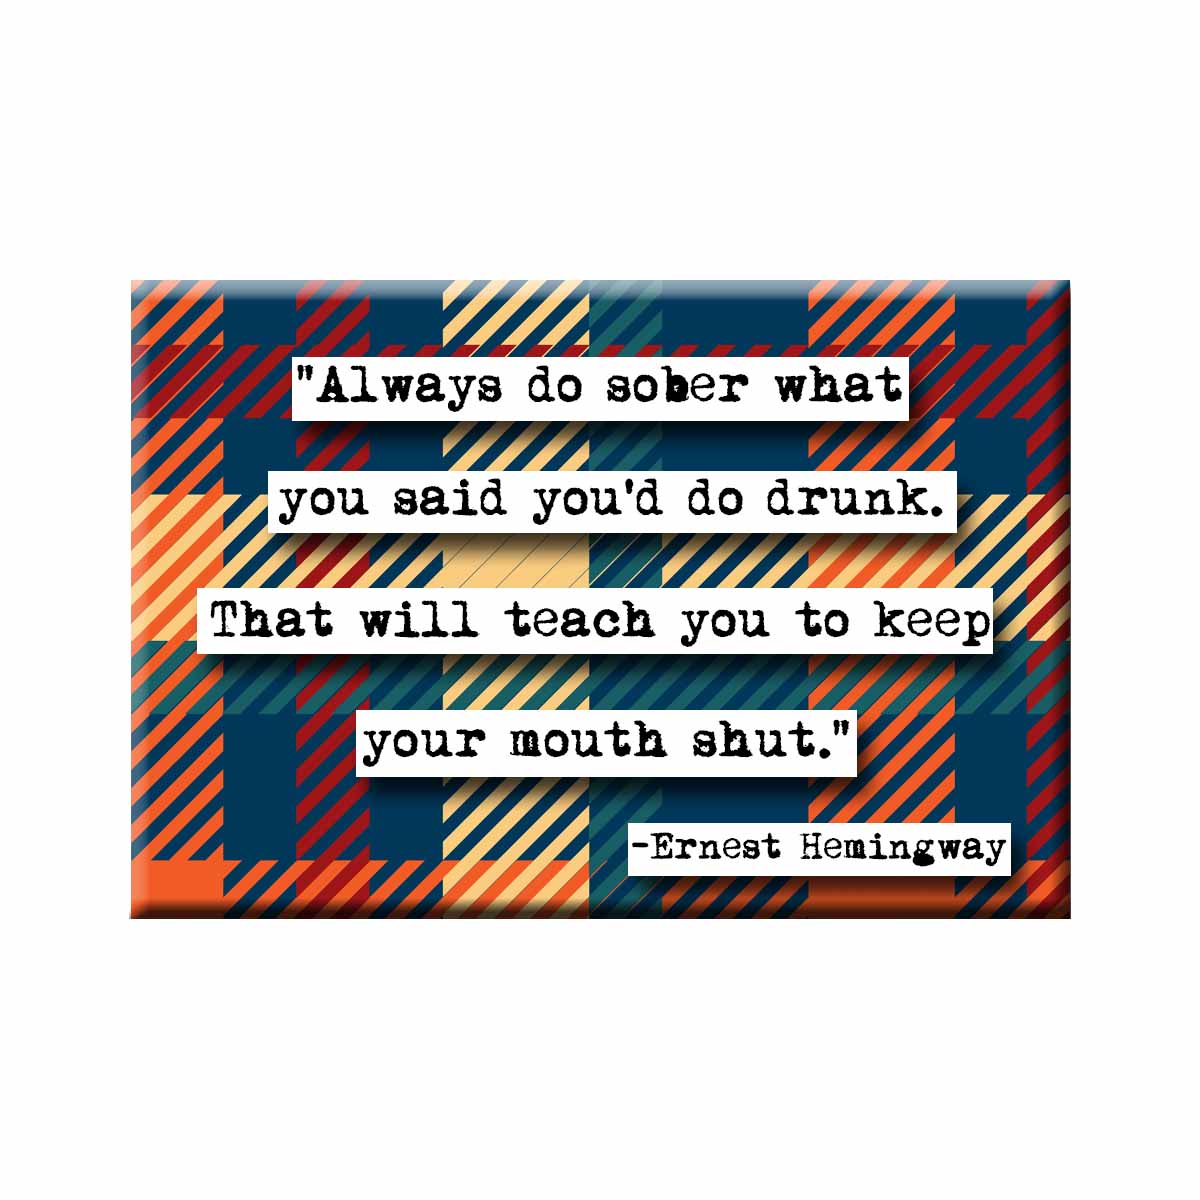 Ernest Hemingway quote magnet. "Always do sober what you said you'd do drunk. That will teach you to keep your mouth shut."